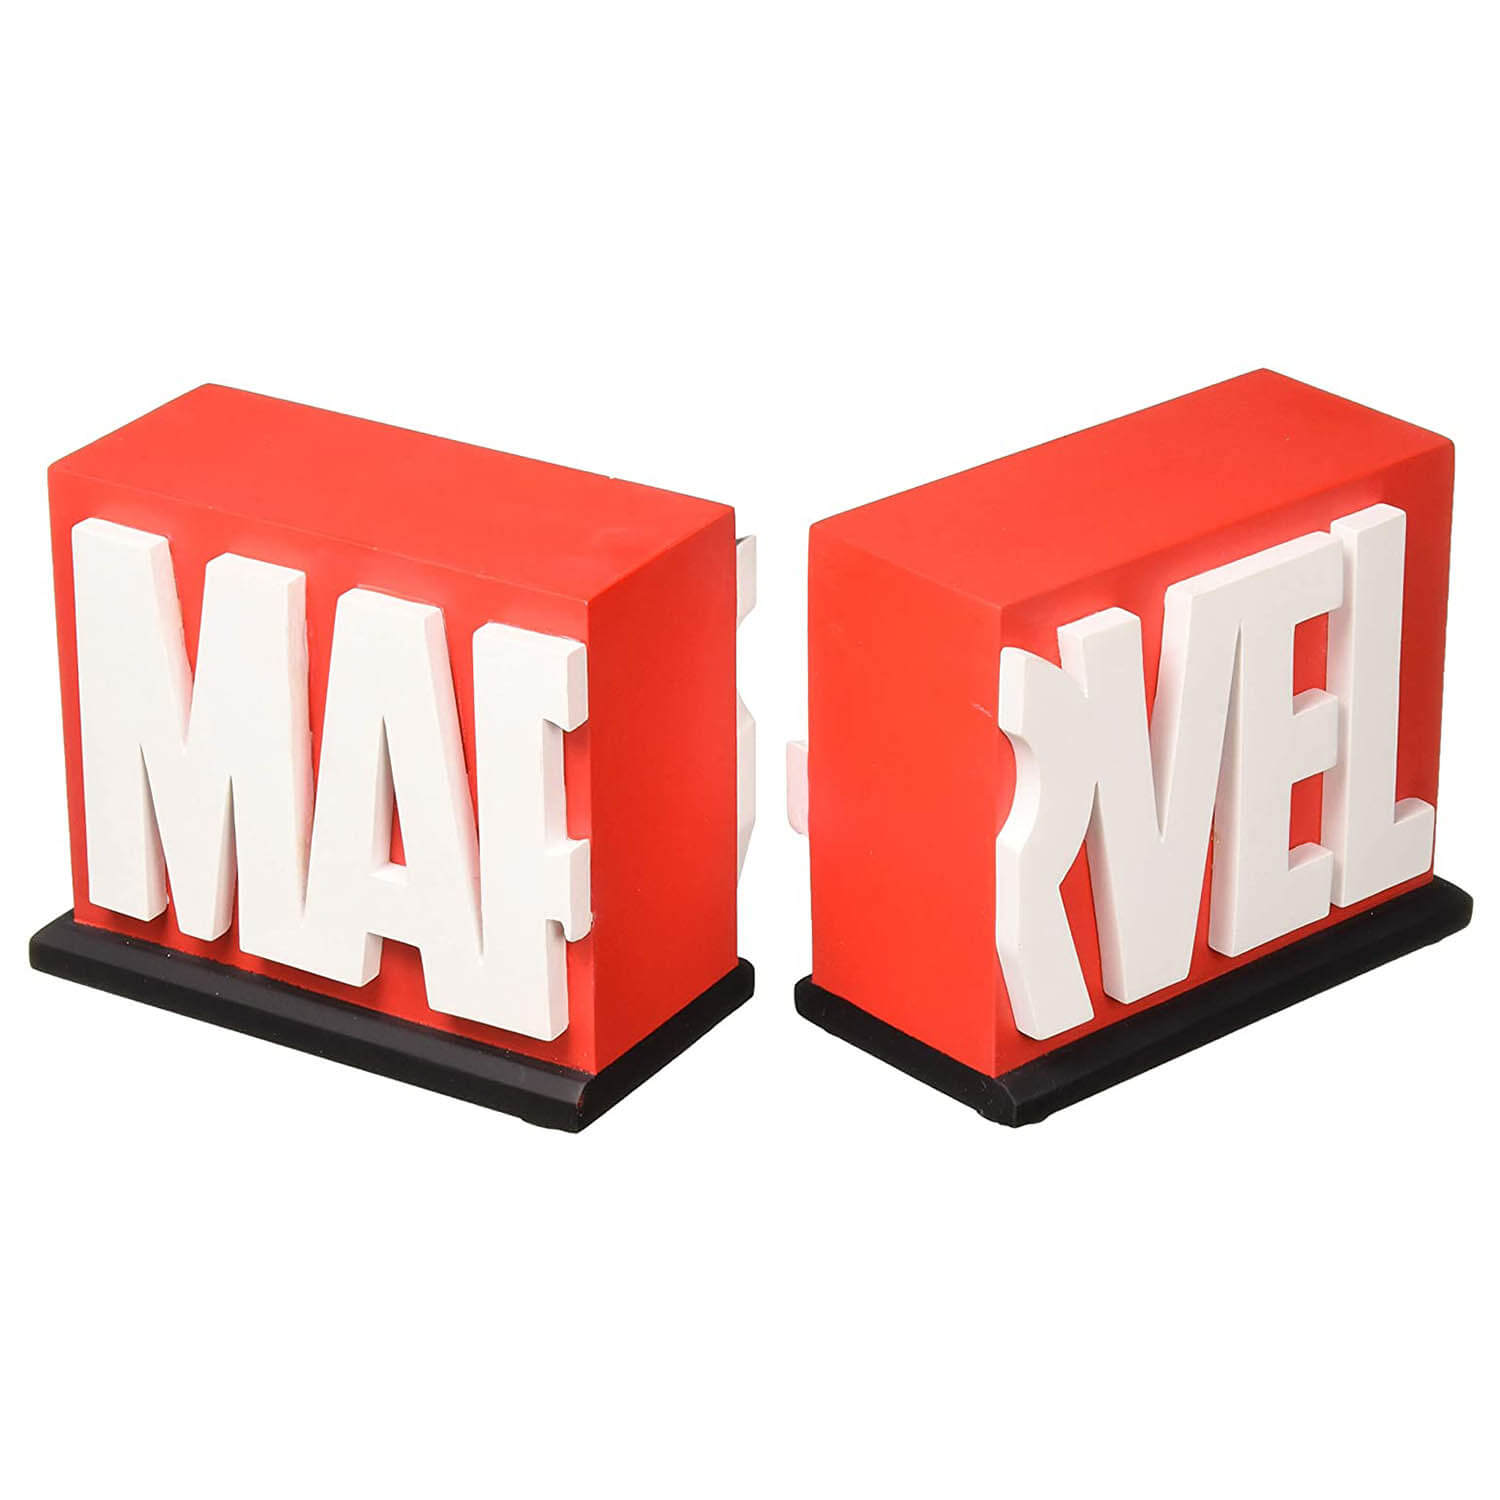 Front view of the marvel bookends.